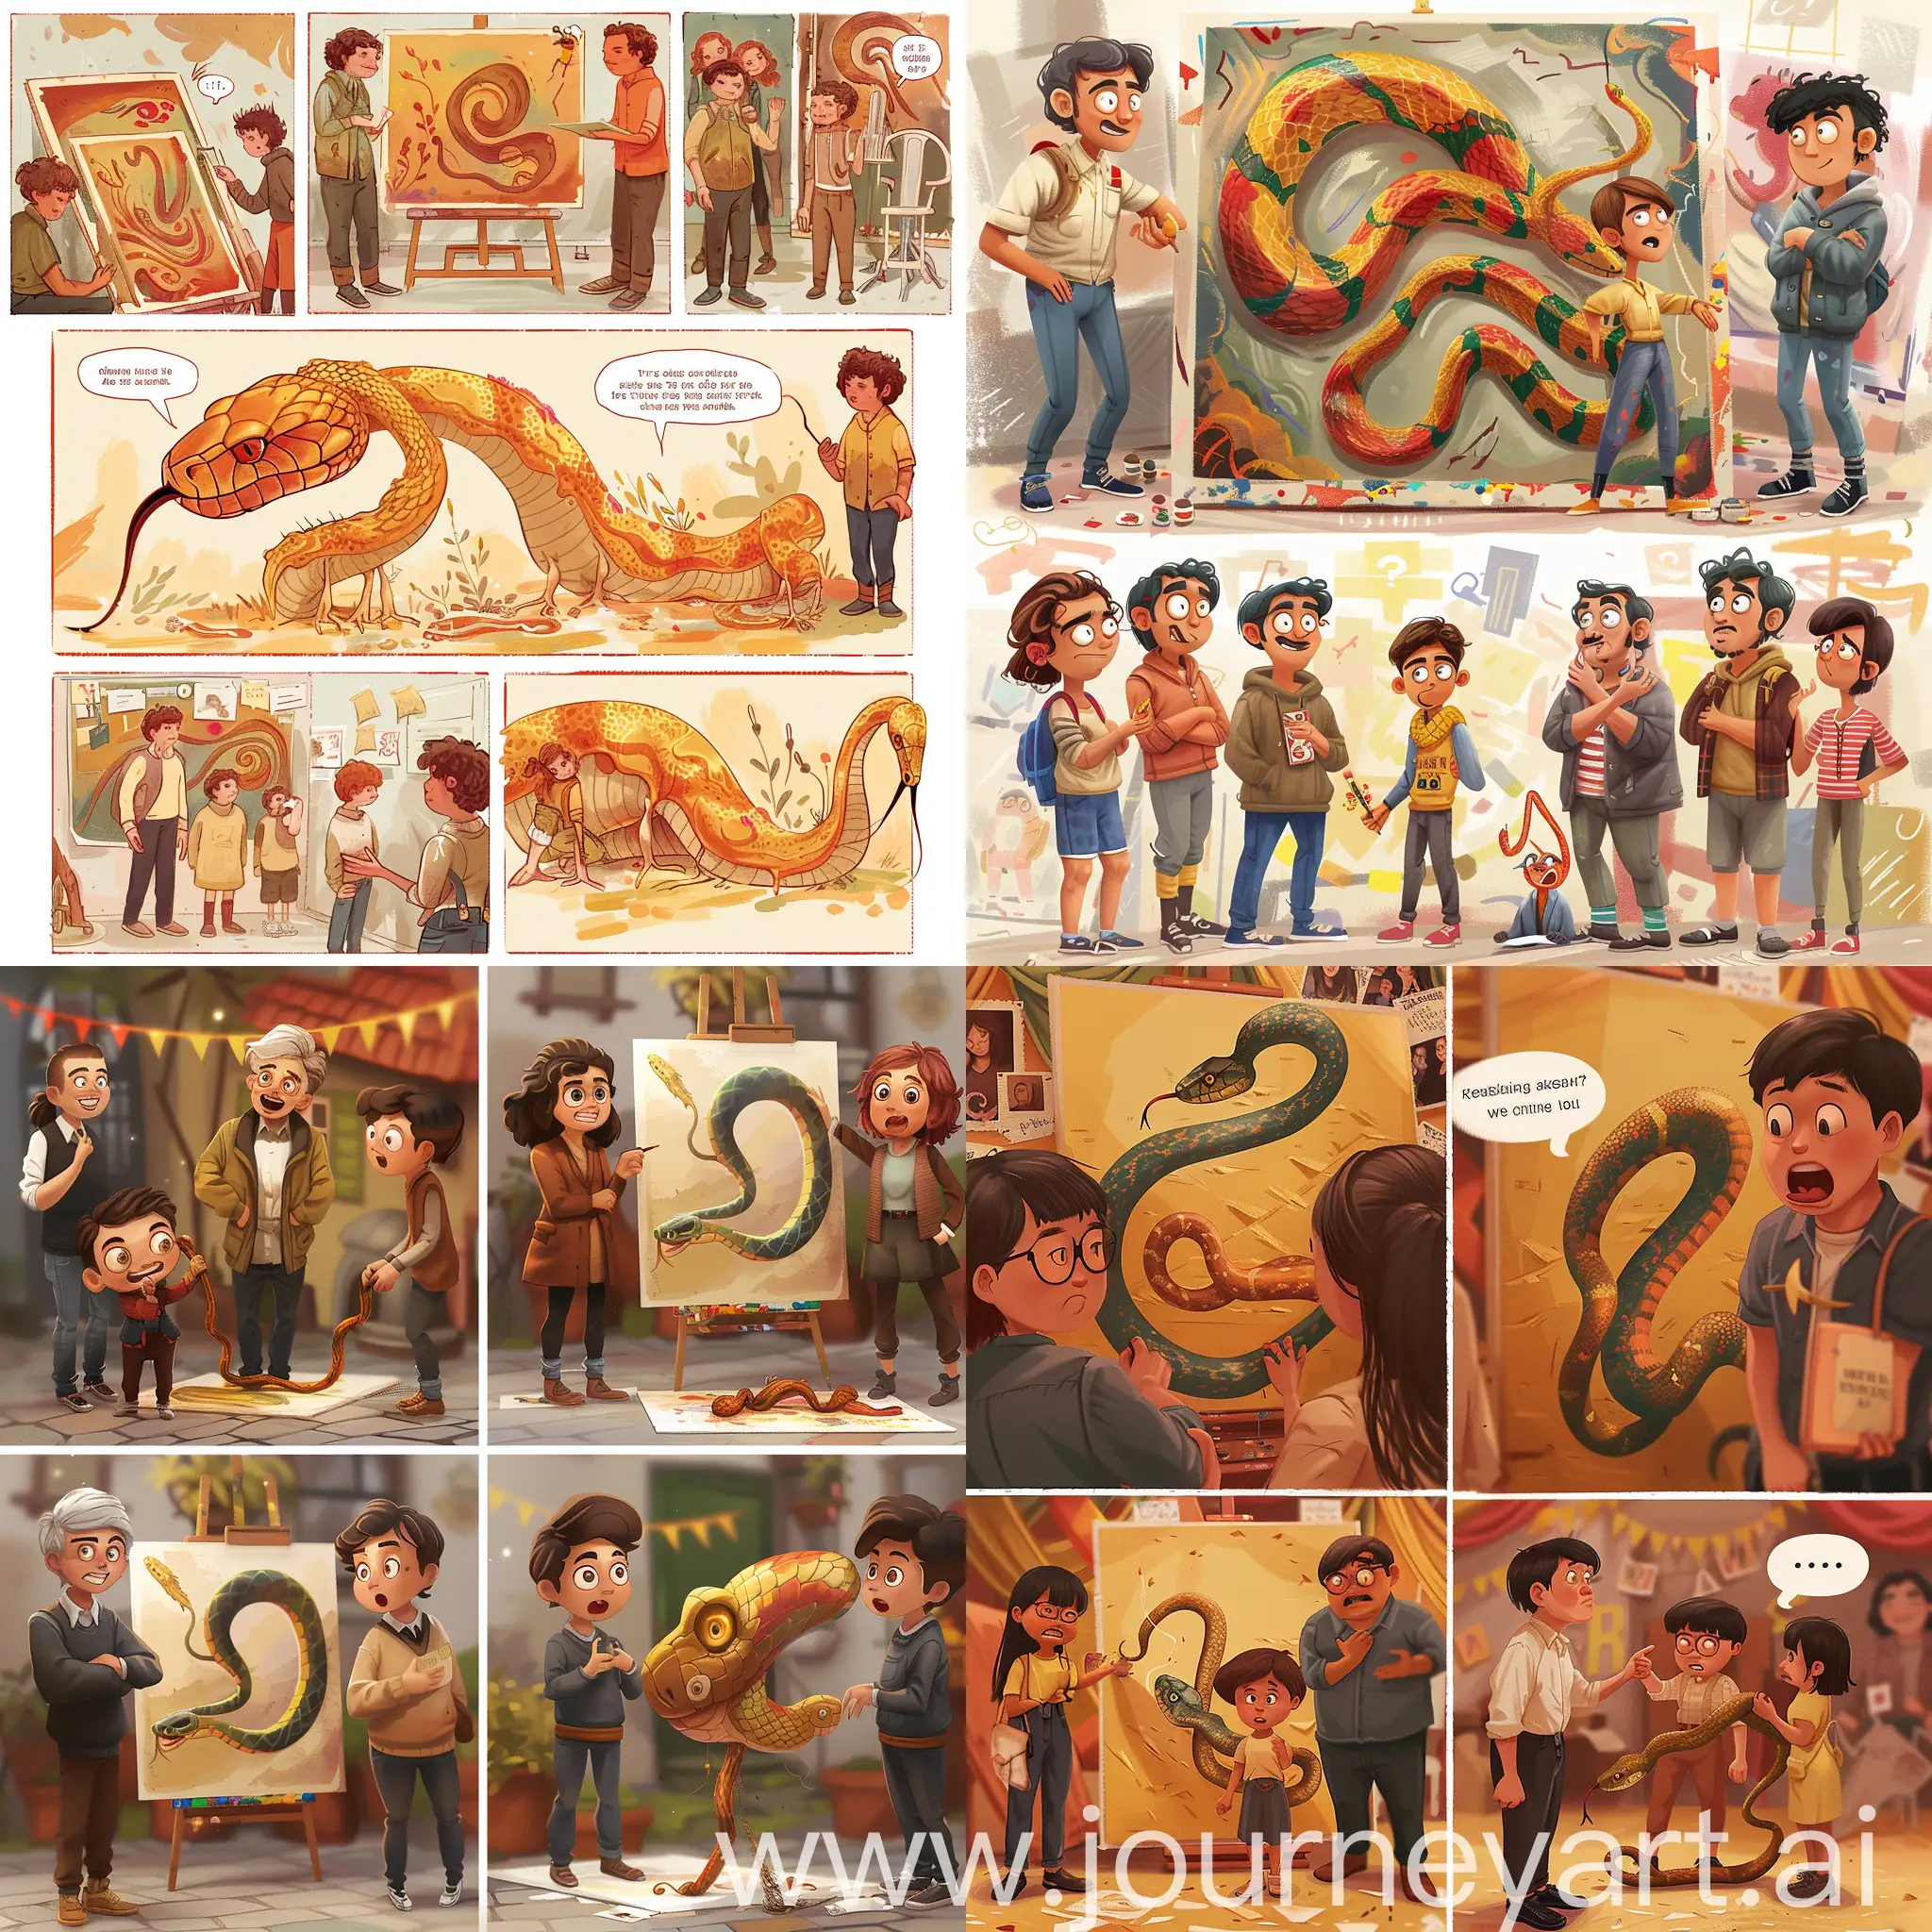 Intense-Painting-Competition-Meticulous-Snake-Artwork-Turns-Amusing